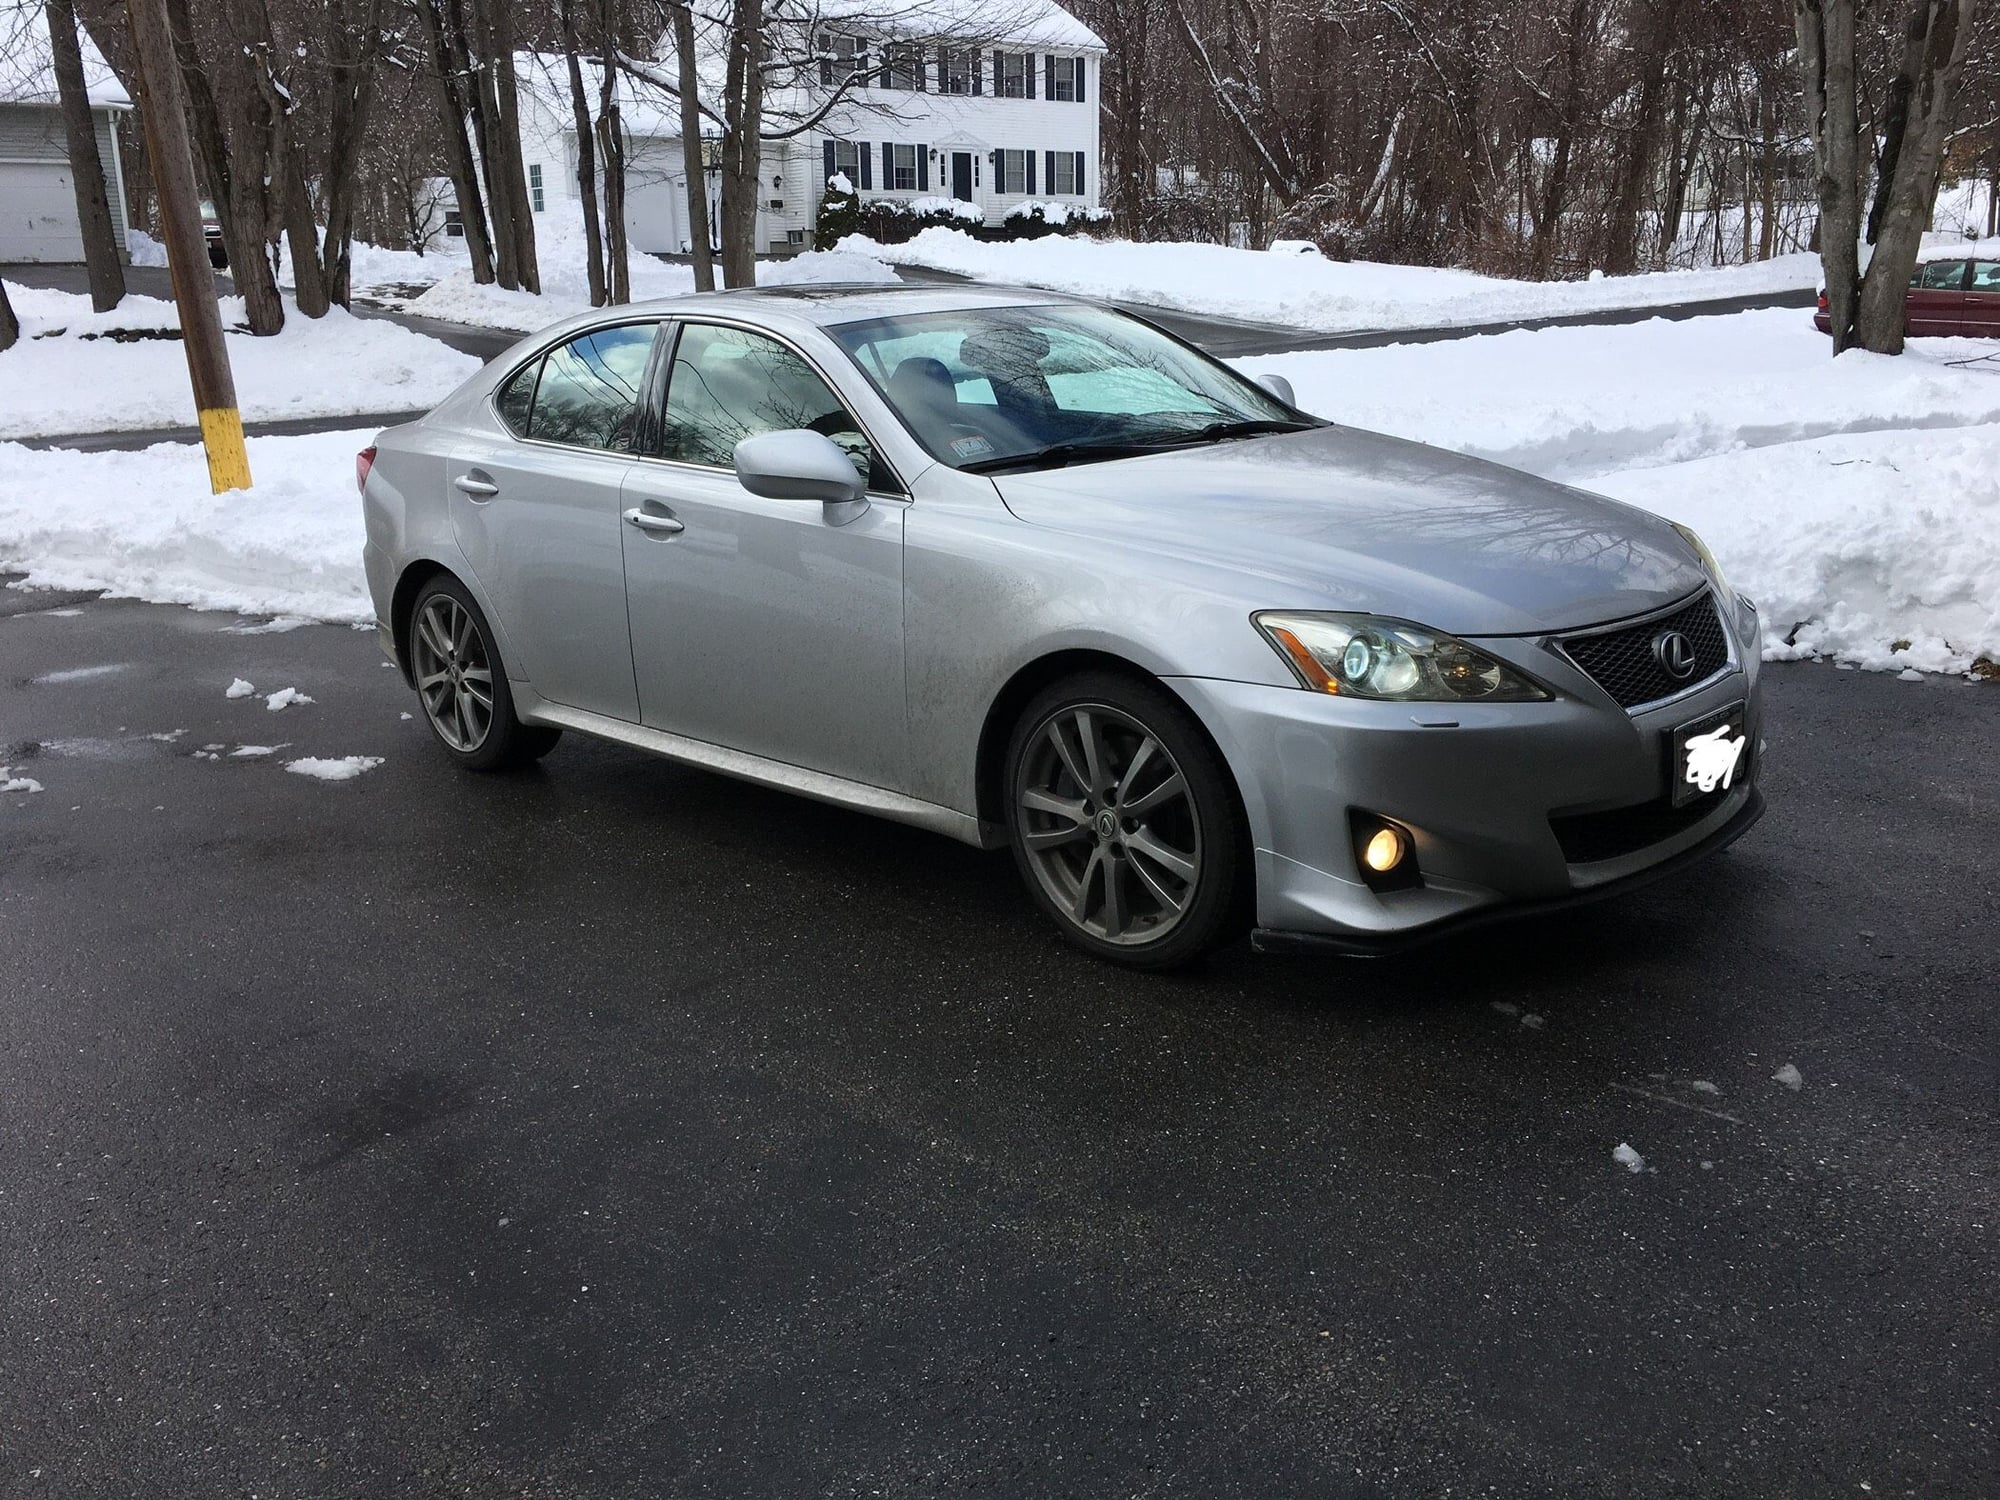 2008 Lexus IS350 - Fs 08 is350 rwd $8500 - Used - VIN JTHBE262X85020459 - 136,000 Miles - 6 cyl - 2WD - Automatic - Sedan - Silver - Leominster, MA 01453, United States